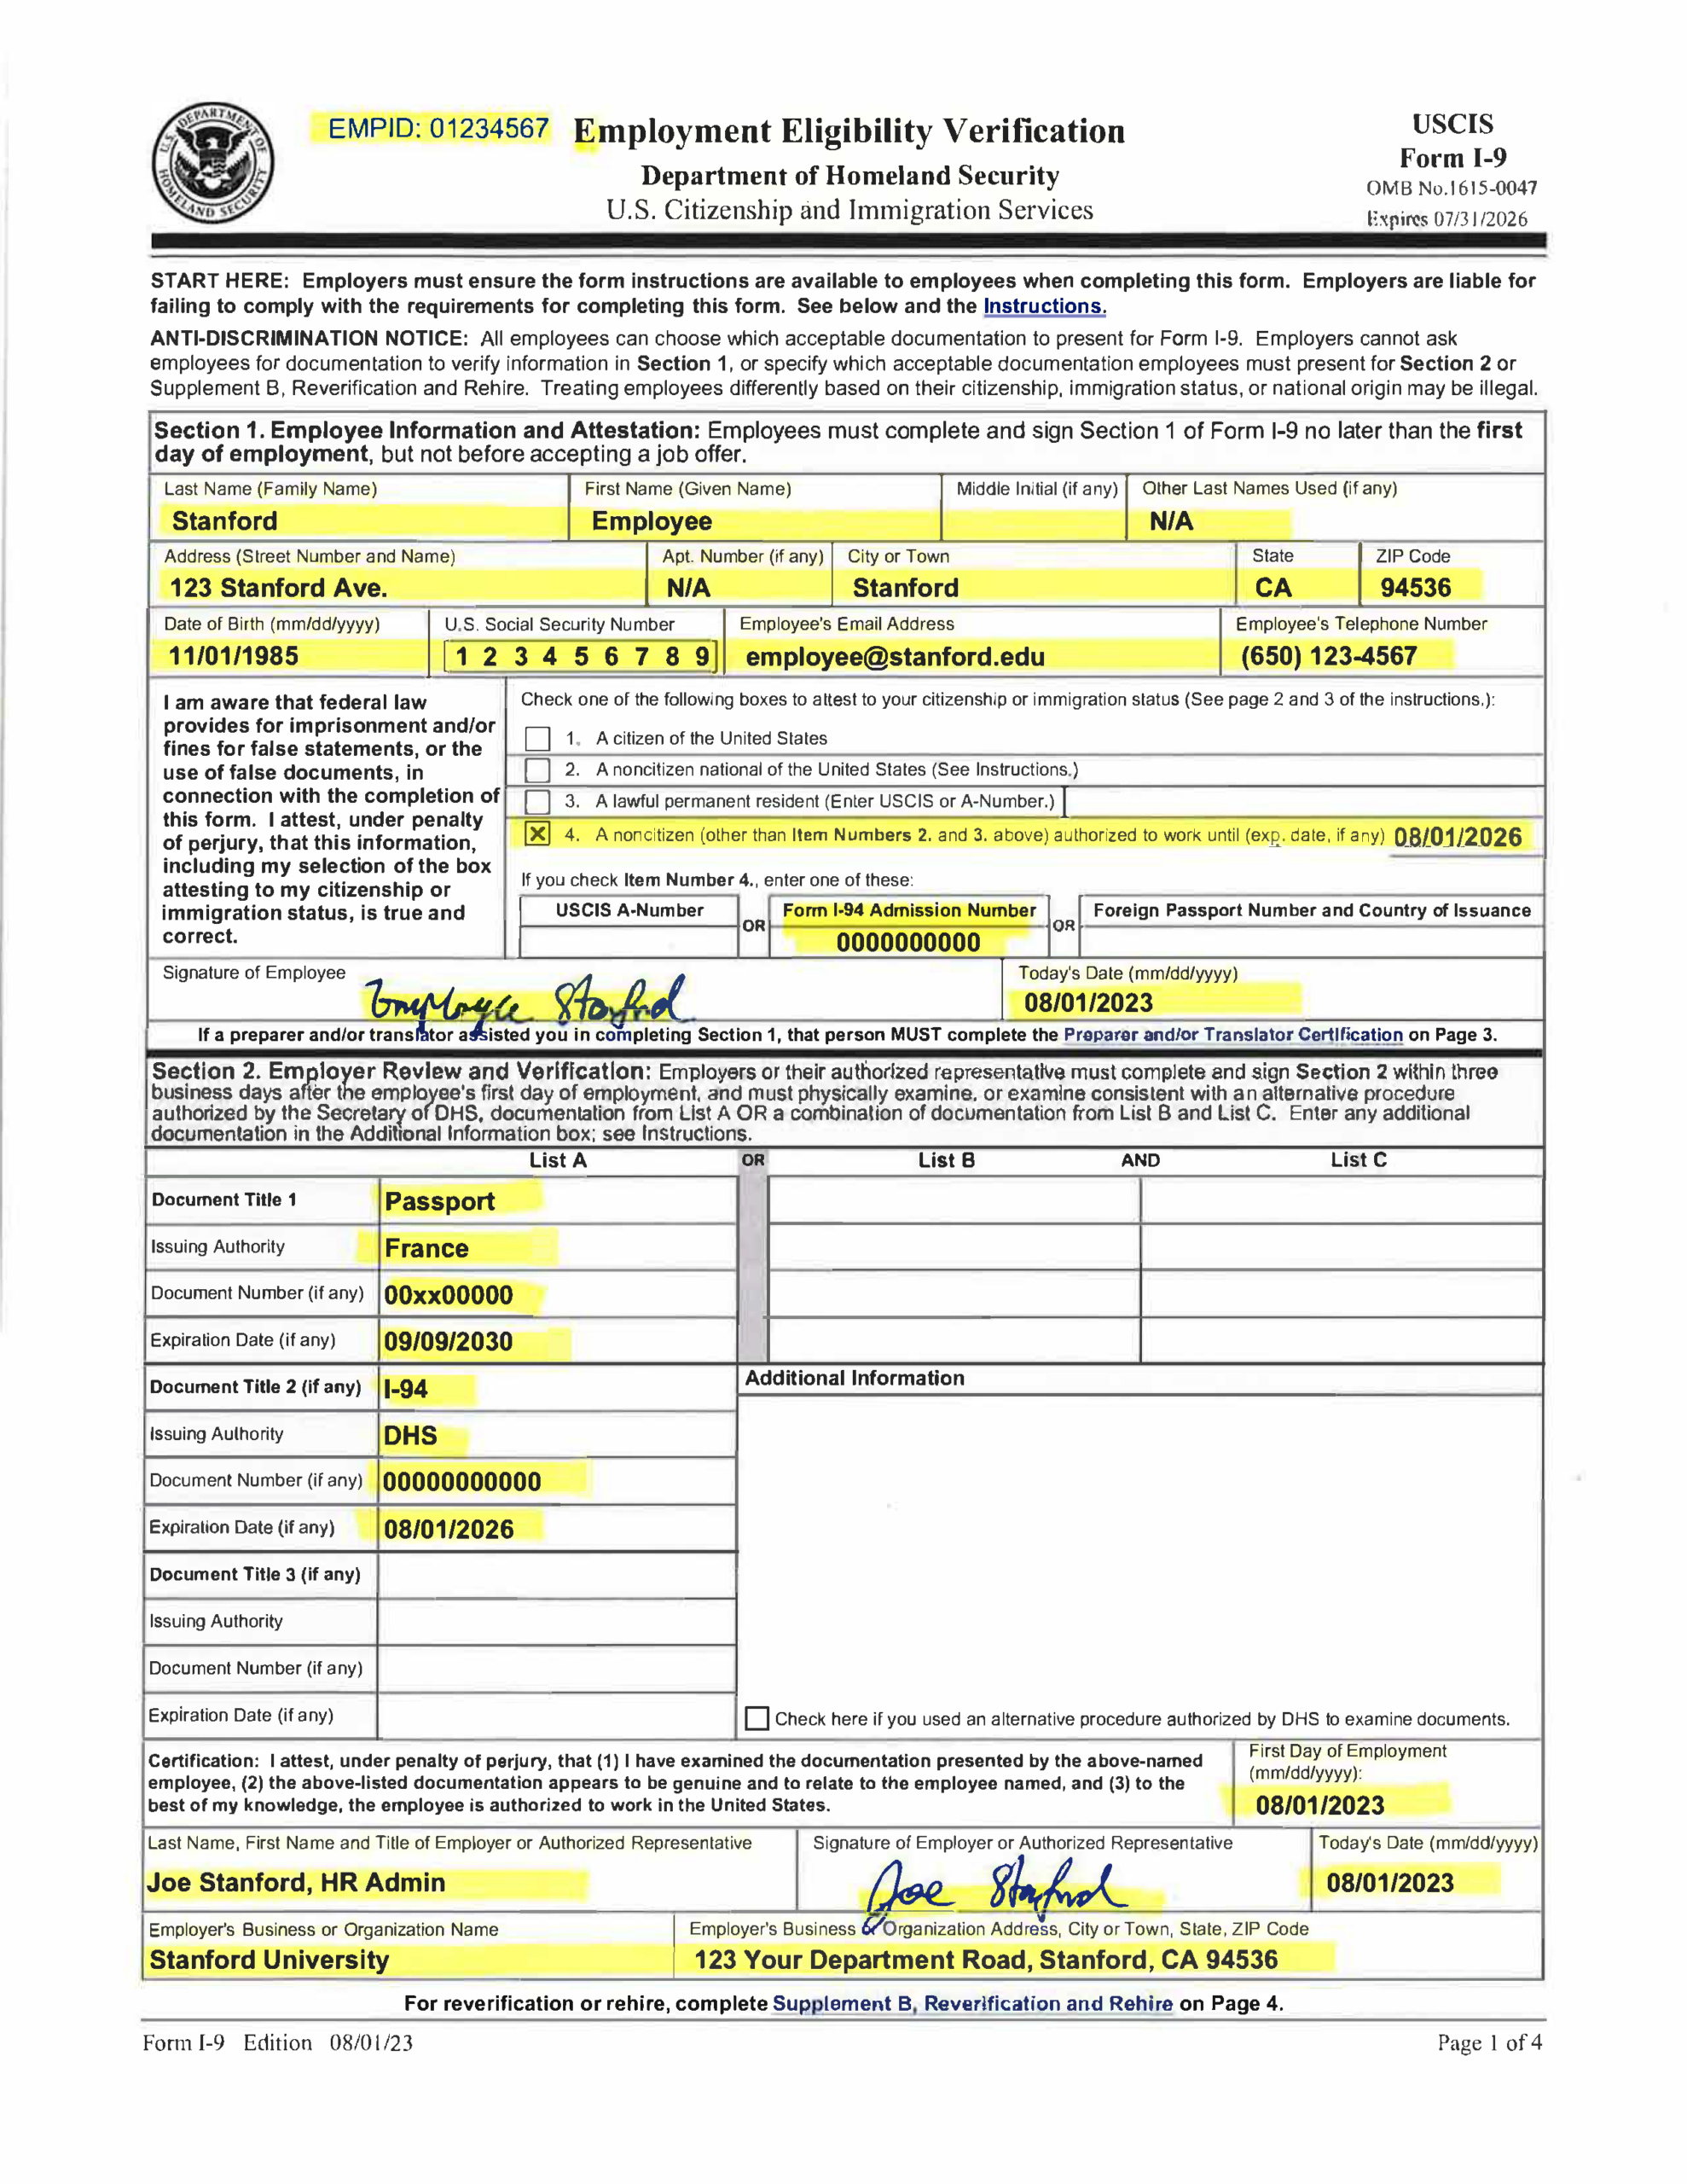 Examples Of Completed Form I-9 For Stanford with USCIS I-9 Form